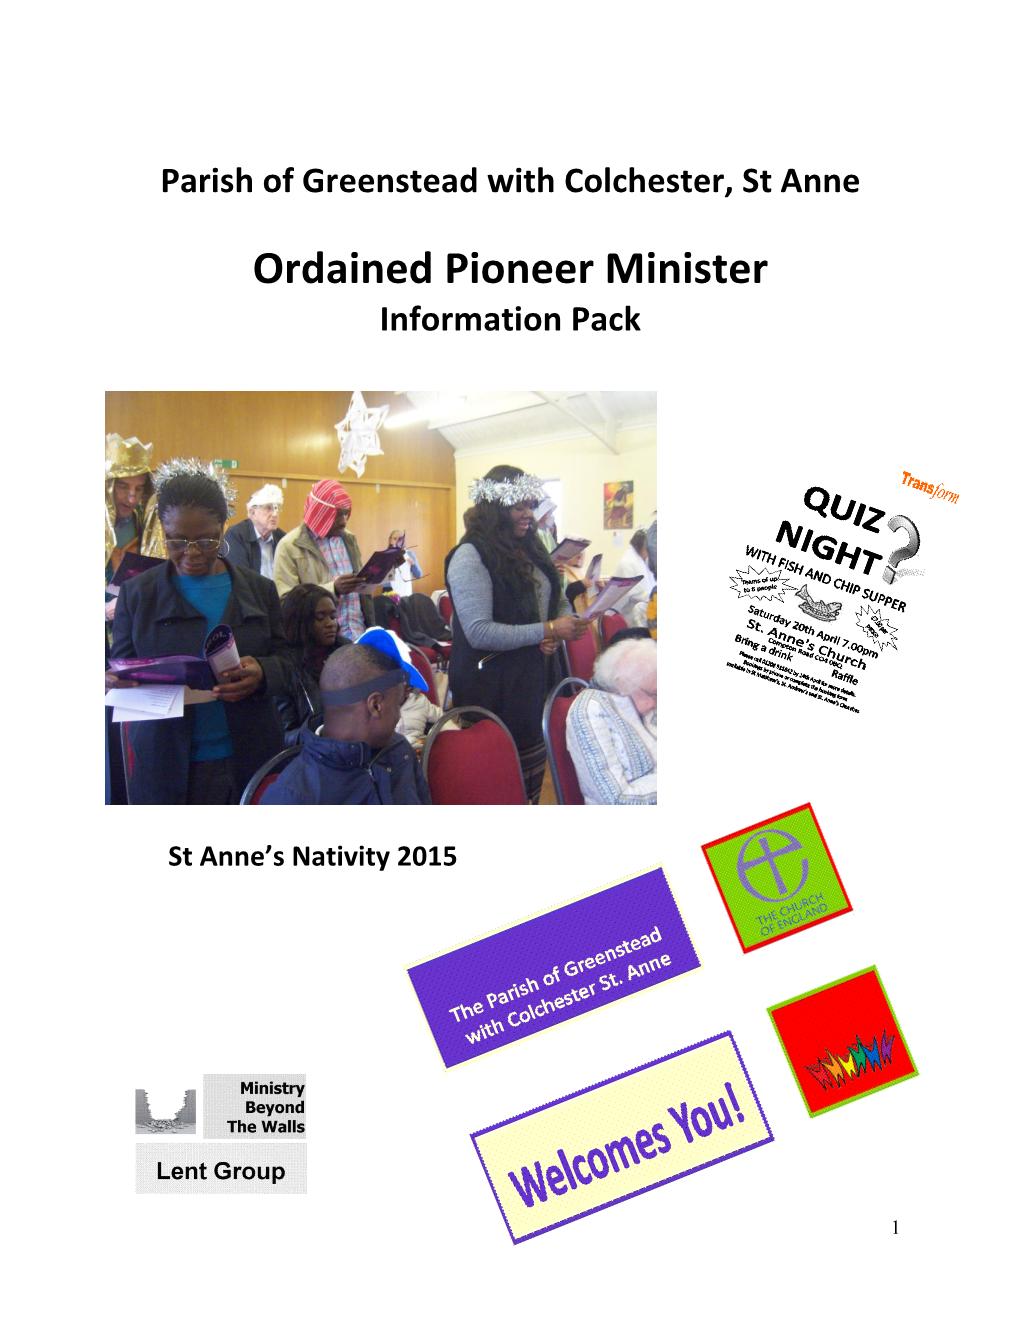 Ordained Pioneer Minister Information Pack